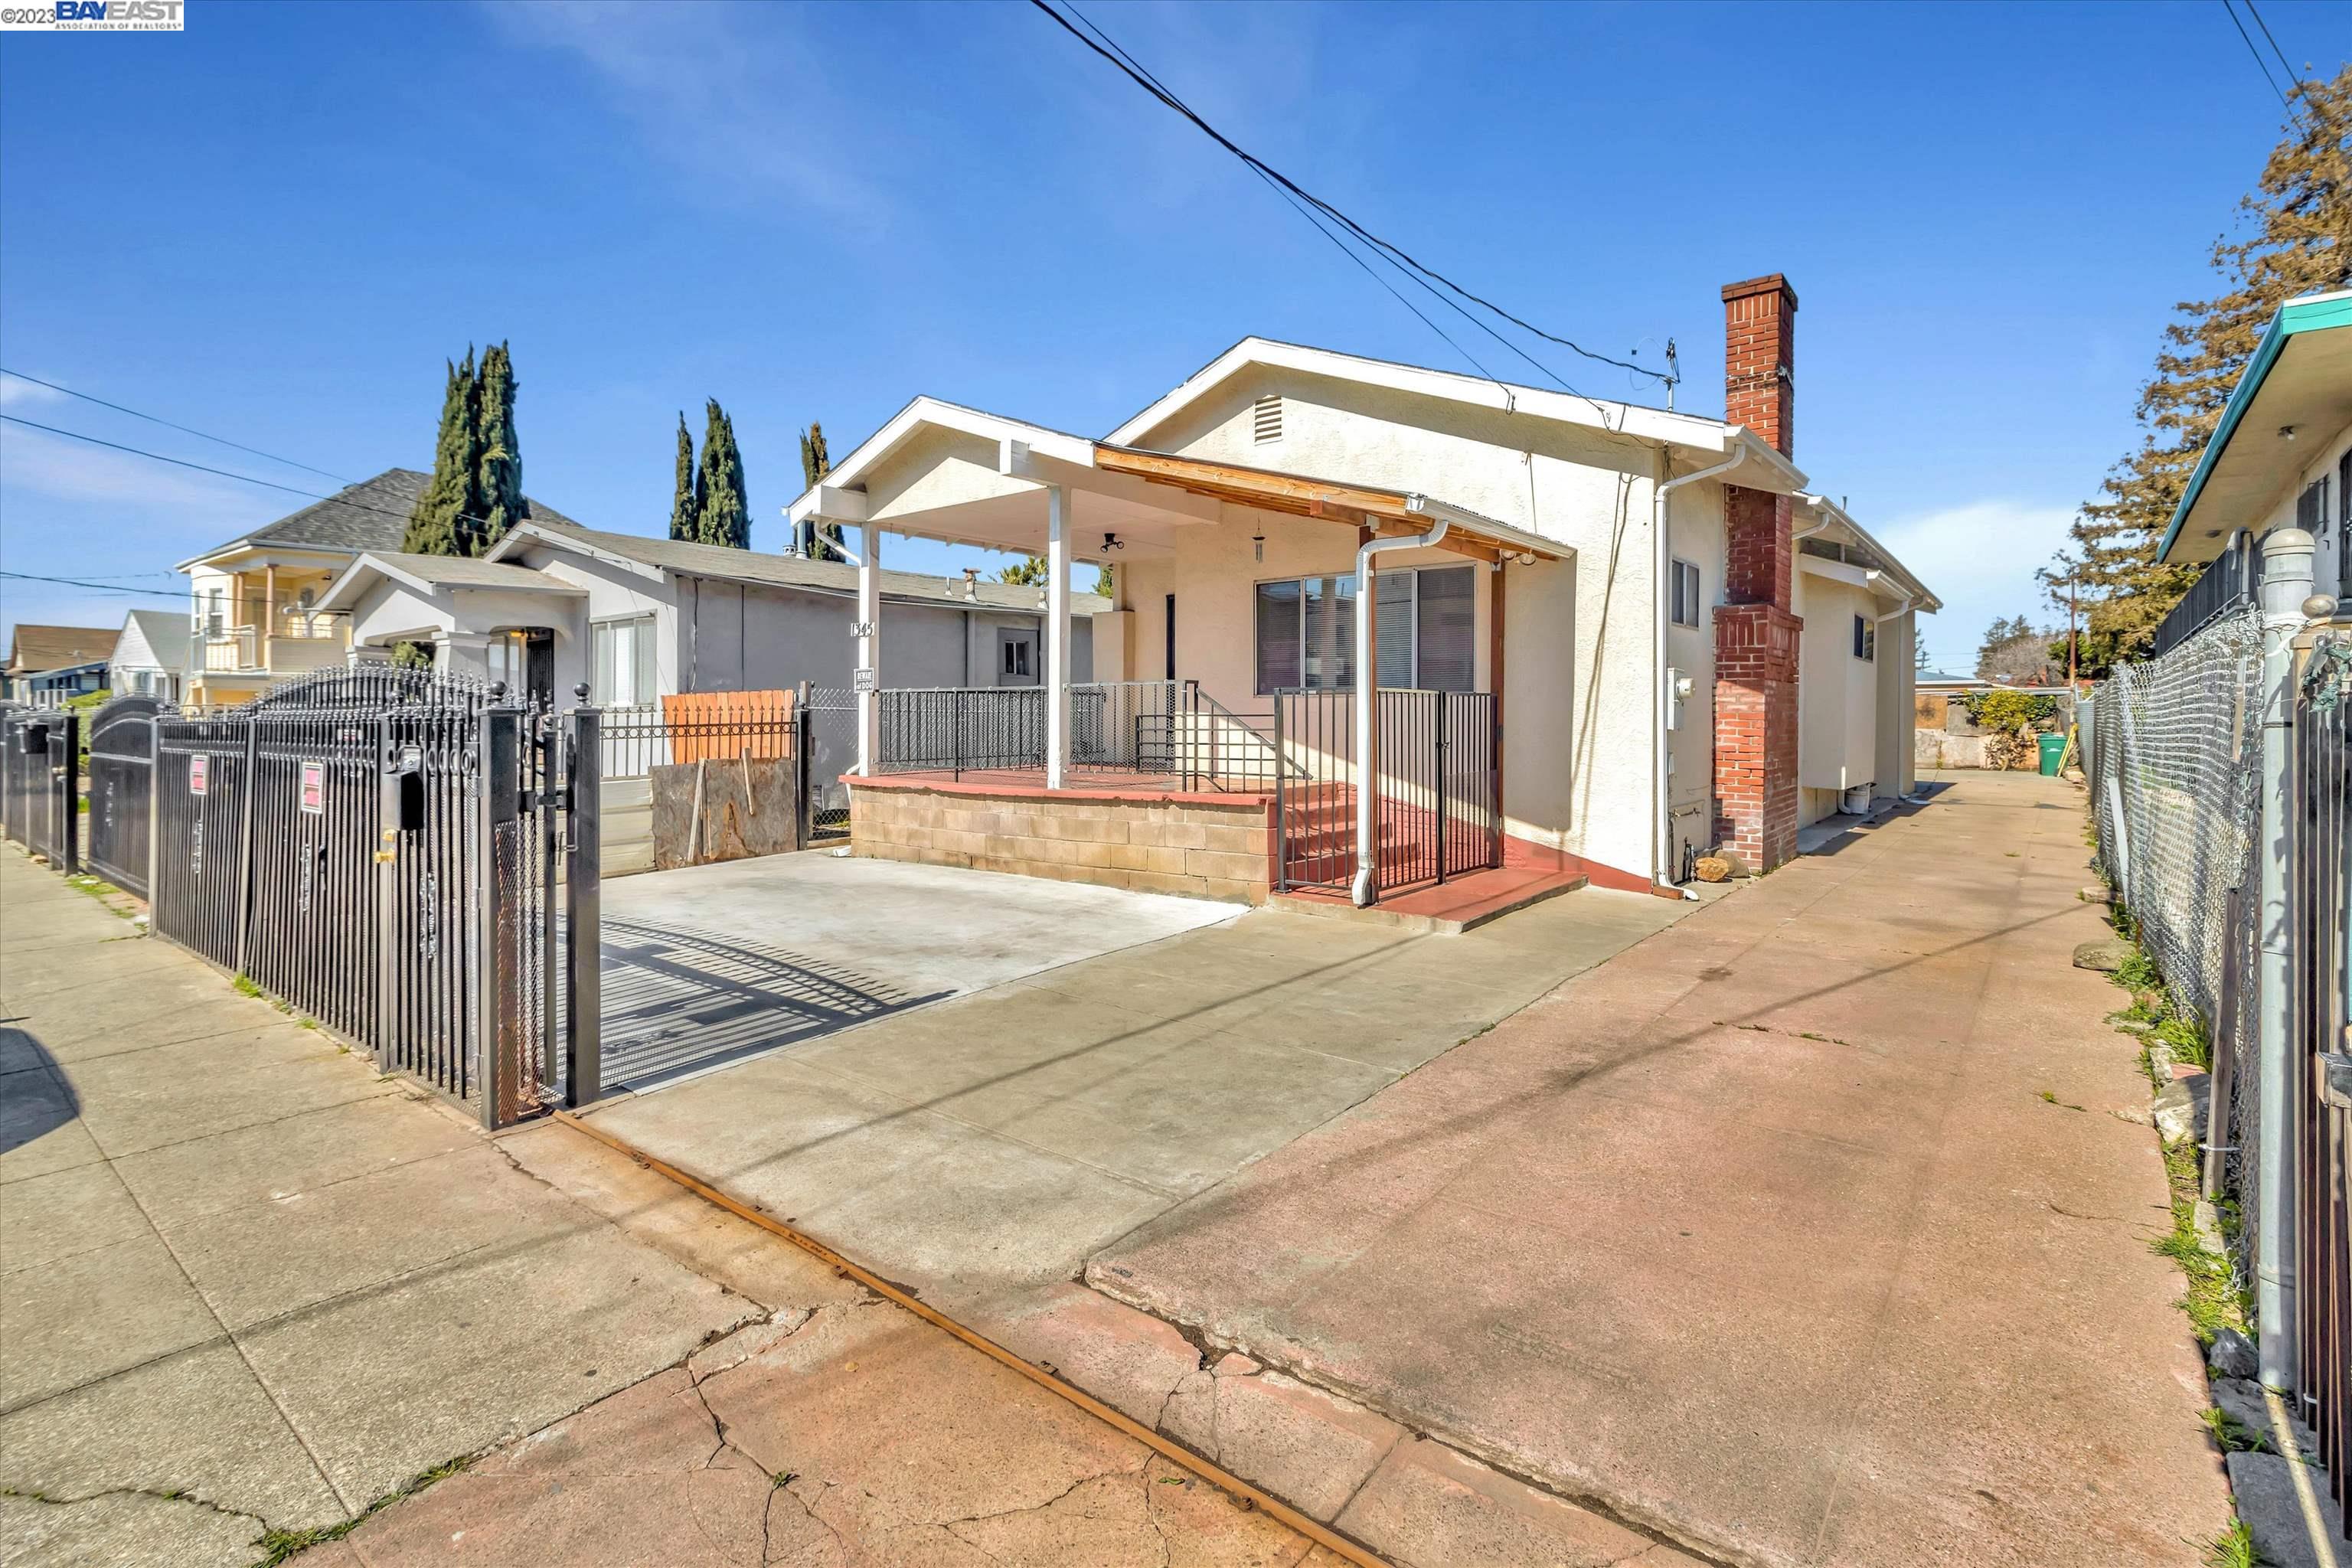 This is a one of kind in East Oakland 3 bedrooms and 2 bathrooms like new kitchen and floorings a must see. Dont miss out on this one. call or make an apoitment now.